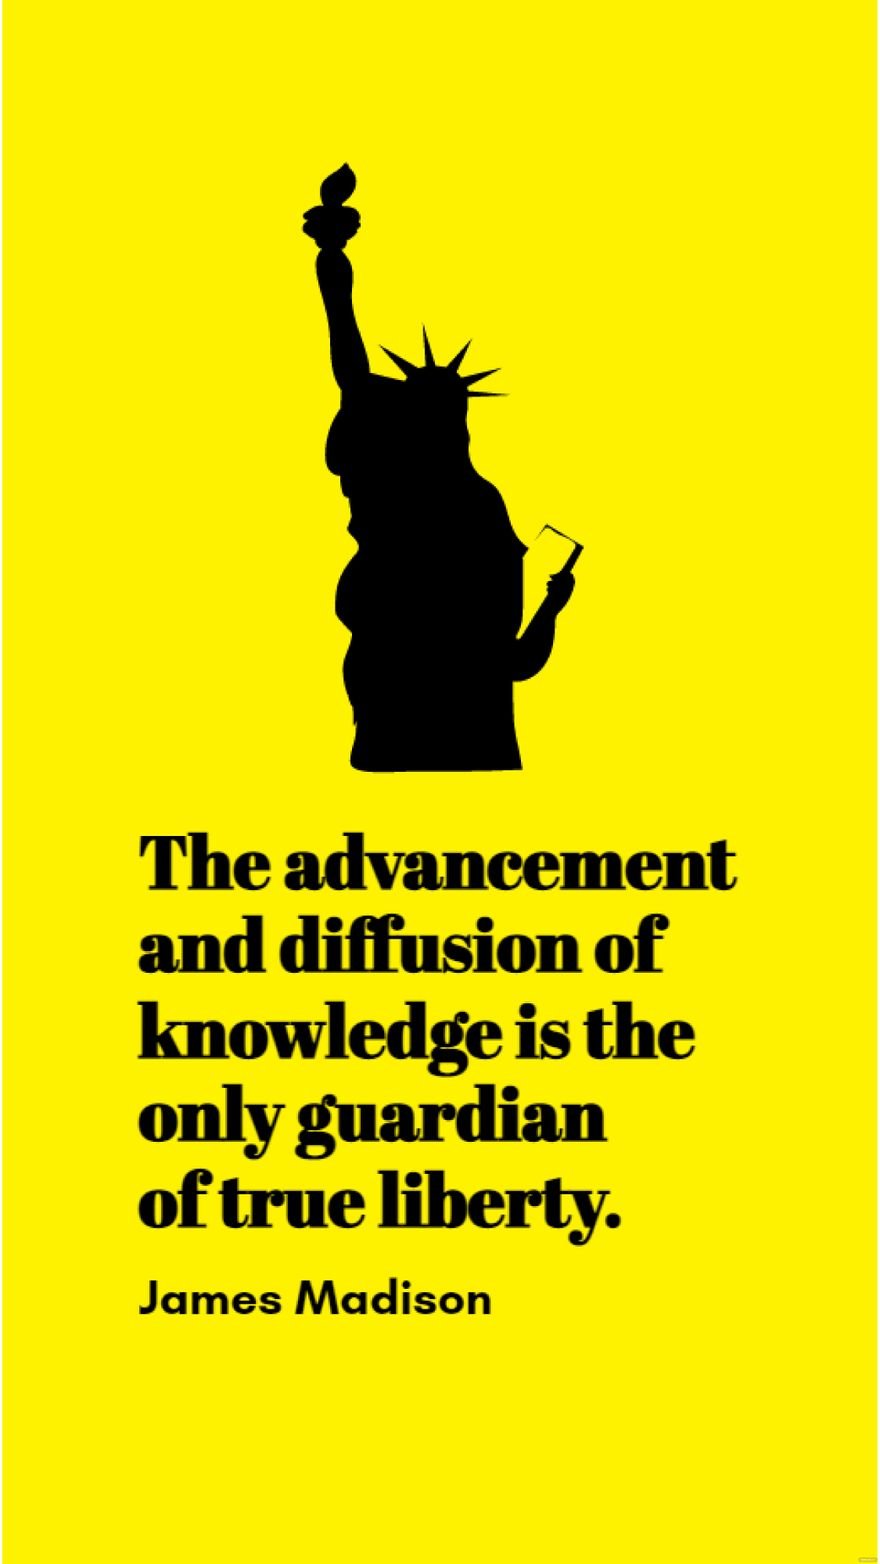 James Madison - The advancement and diffusion of knowledge is the only guardian of true liberty. in JPG